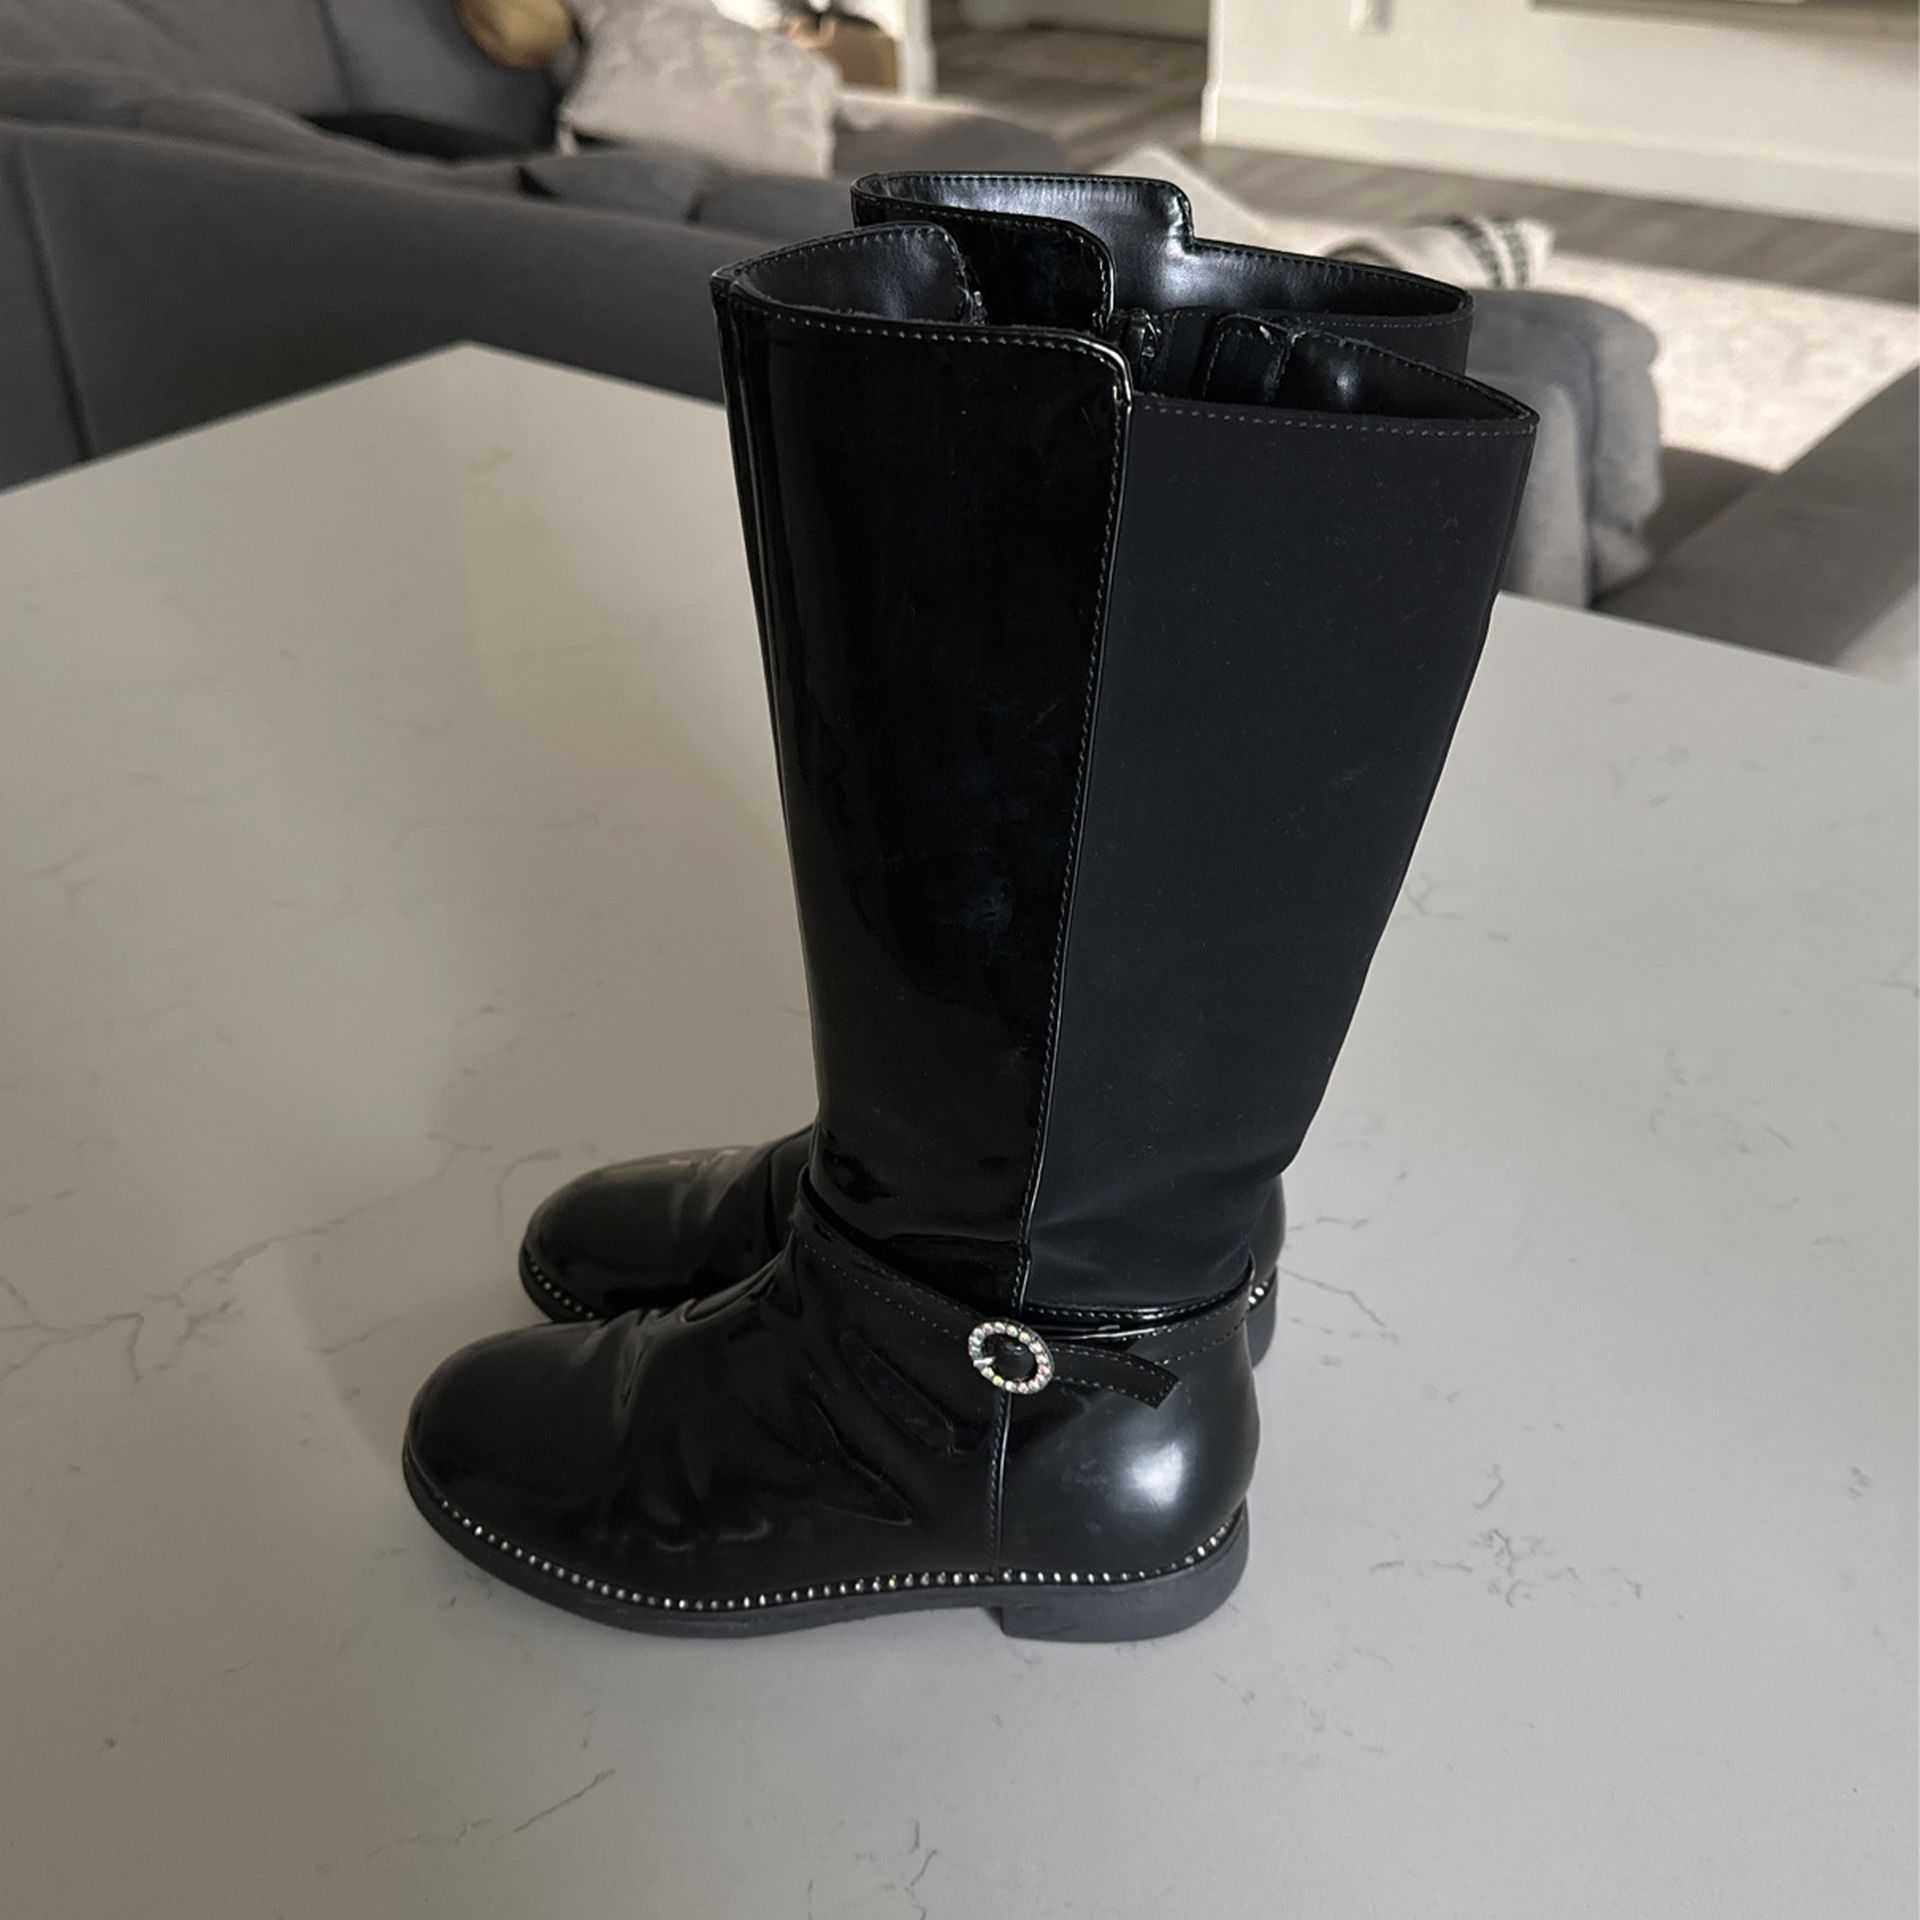 Black Boots Girls Size 13